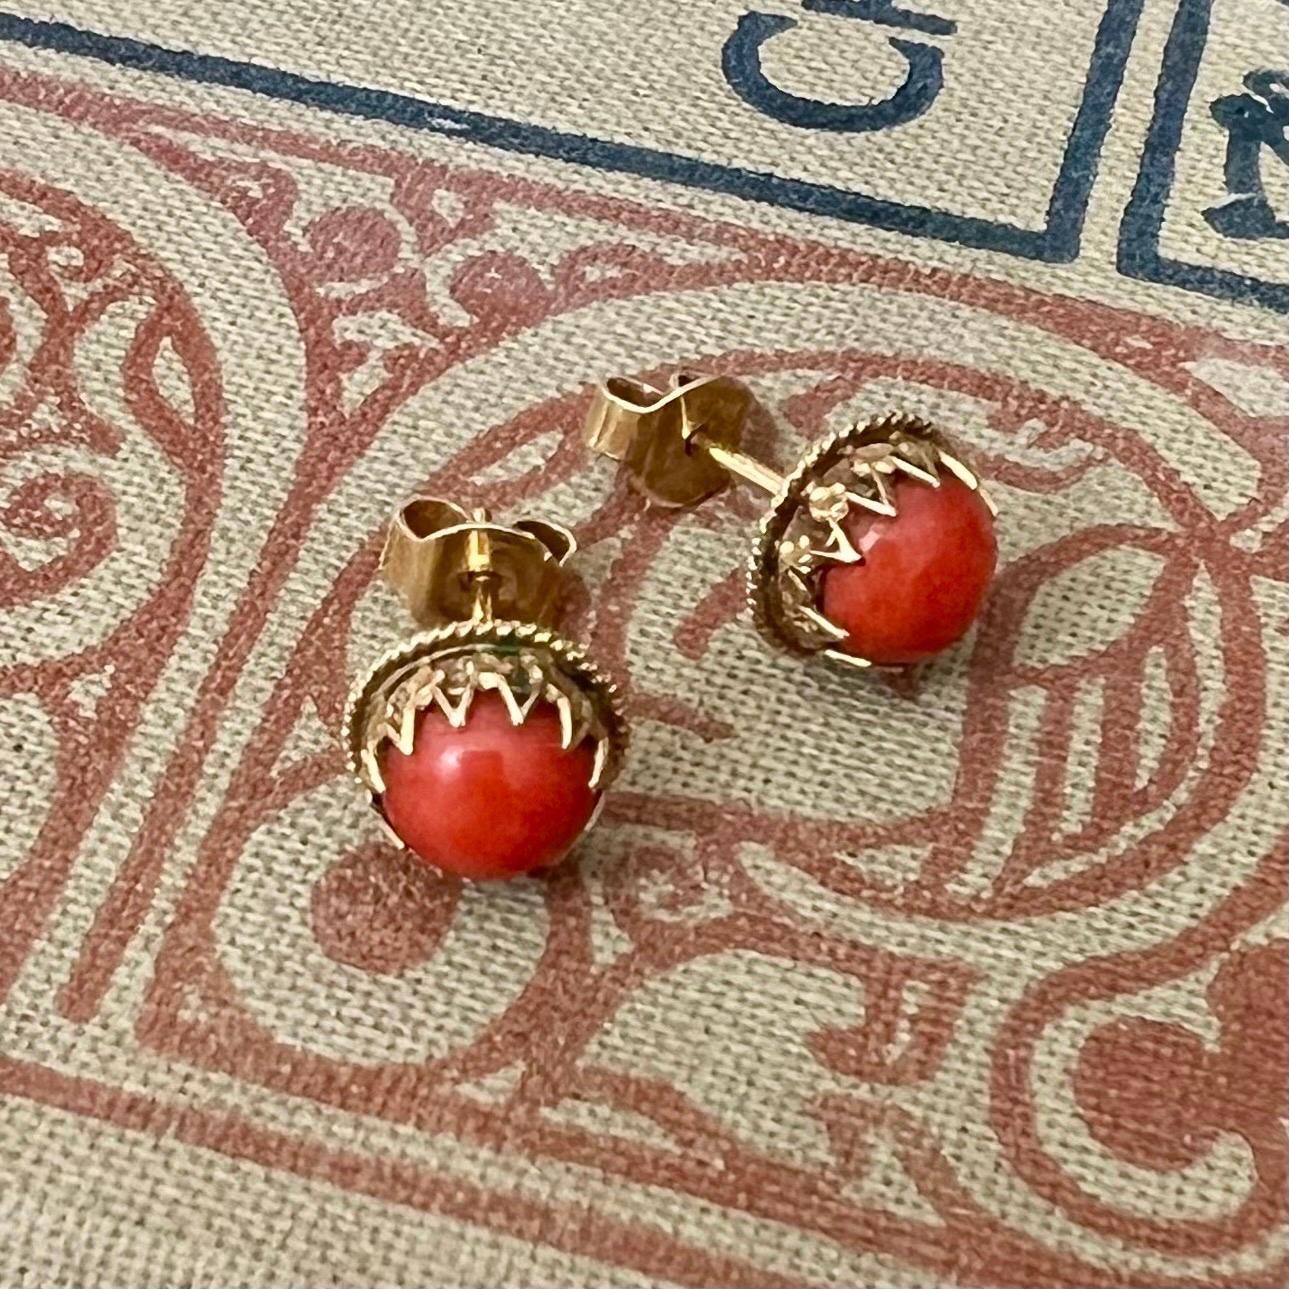 A gorgeous pair of antique red coral and gold stud earrings. The natural coral studs are bezel set in a 14 karat gold mounting. The gold mounting around the stones have a zigzag prong setting and rope decor. The studs are crafted with a round